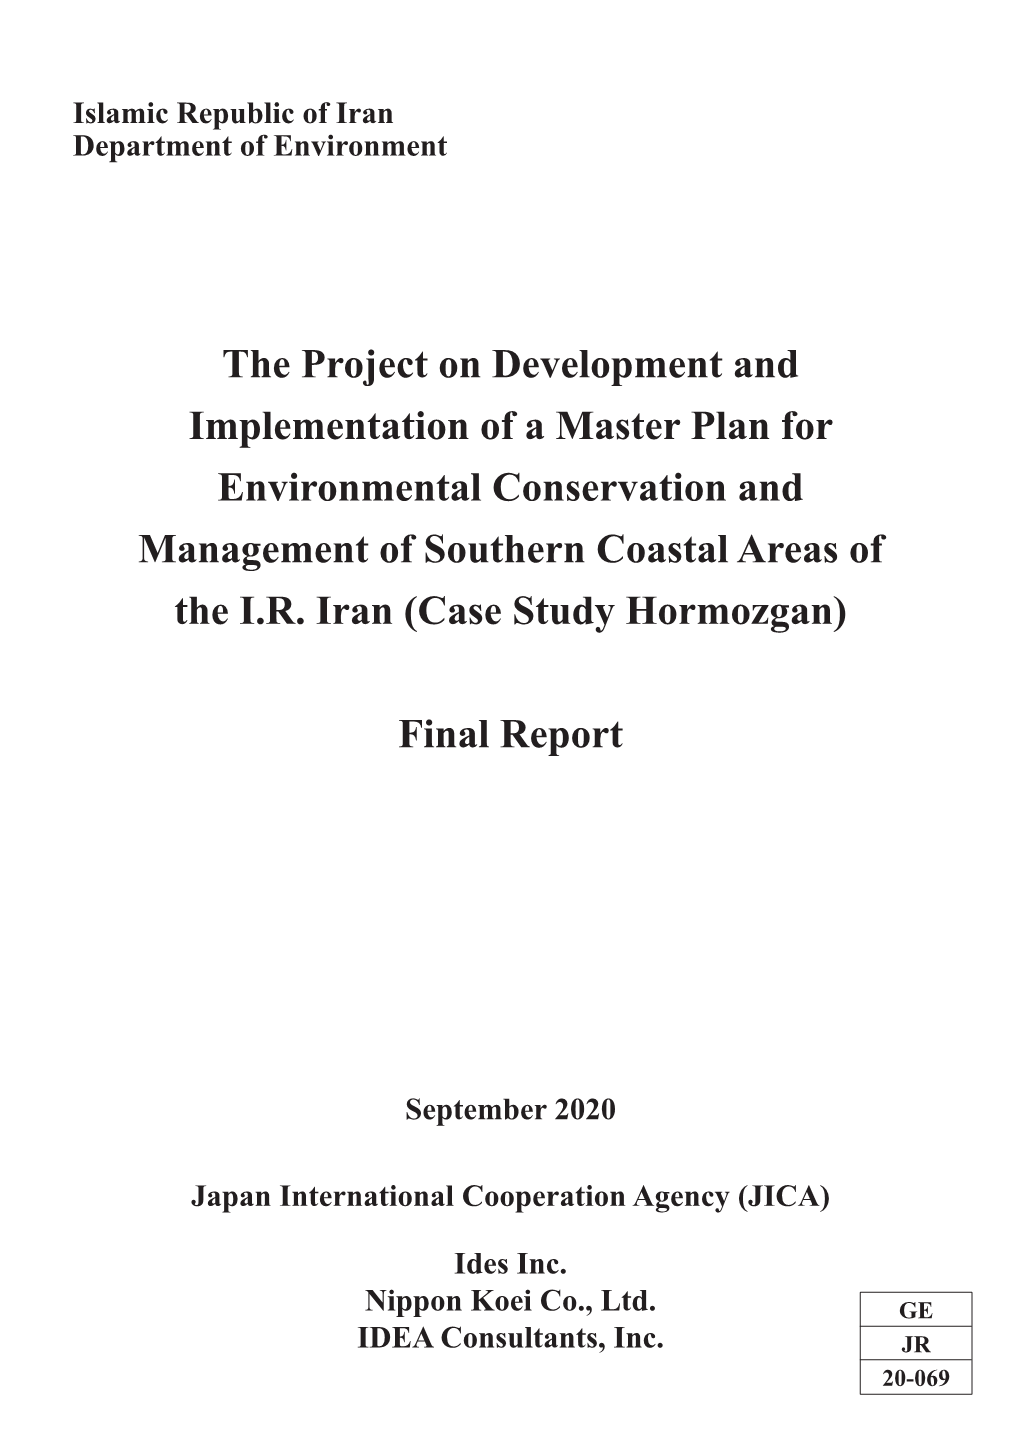 The Project on Development and Implementation of a Master Plan for Environmental Conservation and Management of Southern Coastal Areas of the I.R